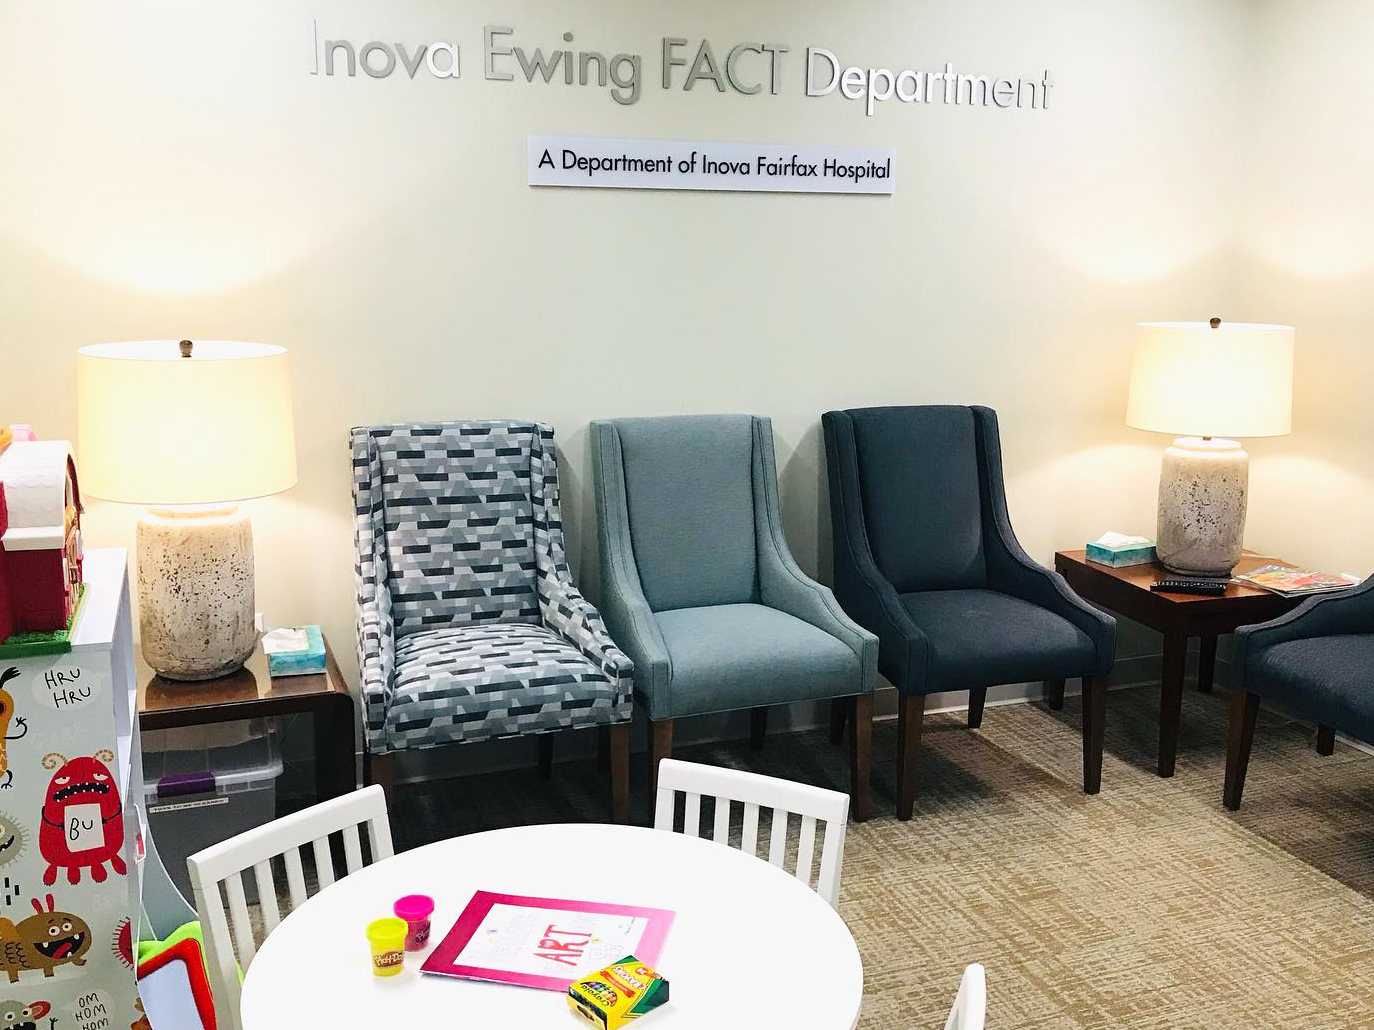 Inova FACT Department waiting area, three chairs and table